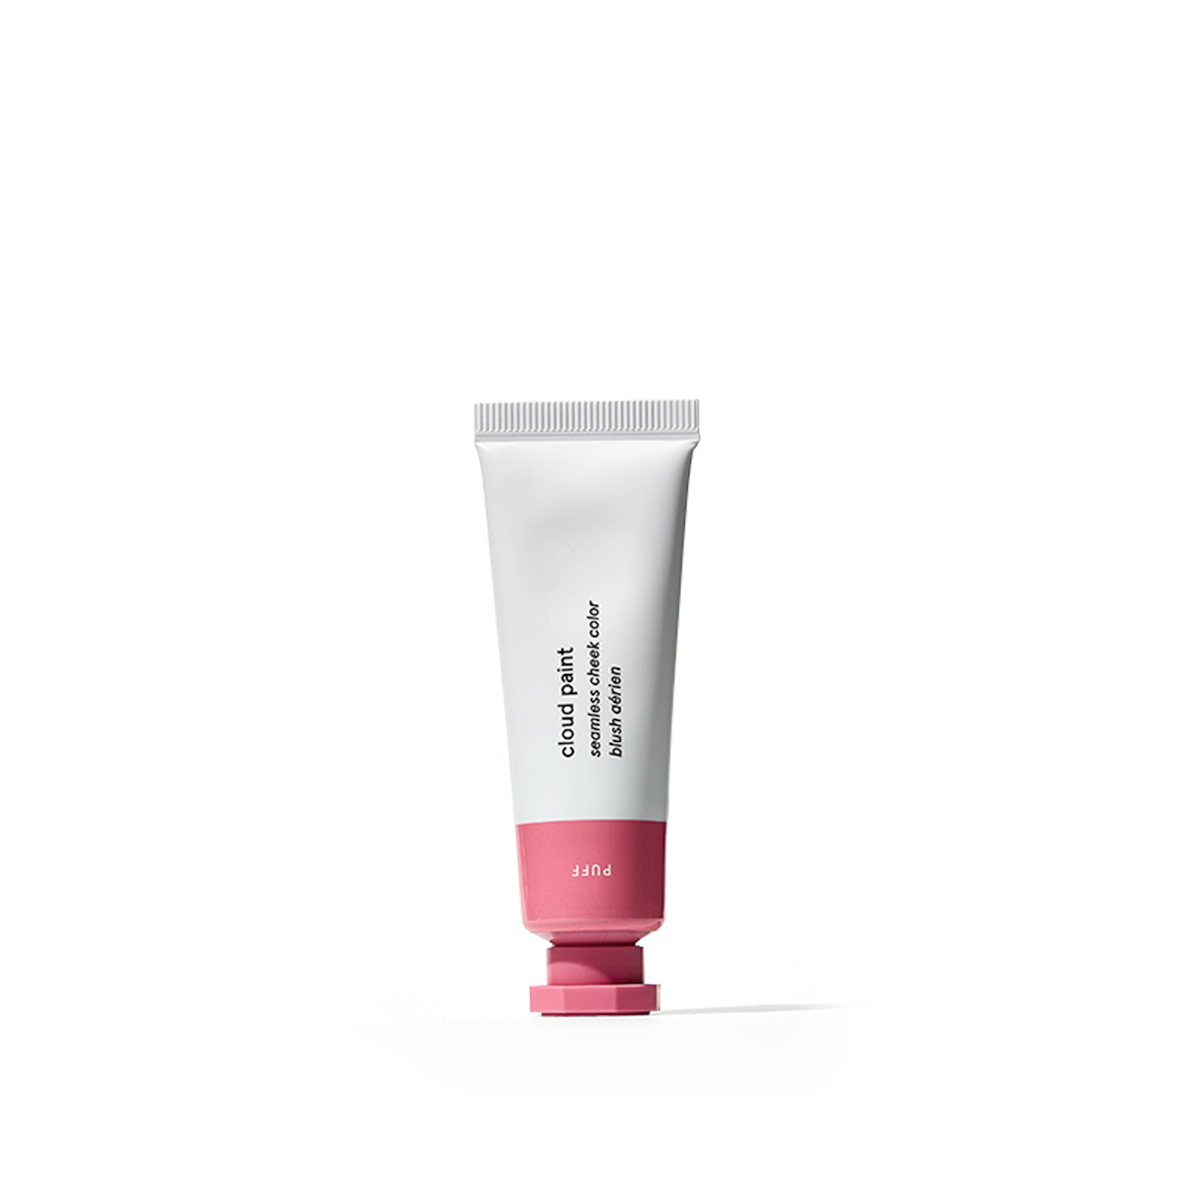 Glossier Cloud Paint in Puff, Buildable gel-cream blush, 0_33 fl oz, a light cool pink that creates a healthy brightening effect.png